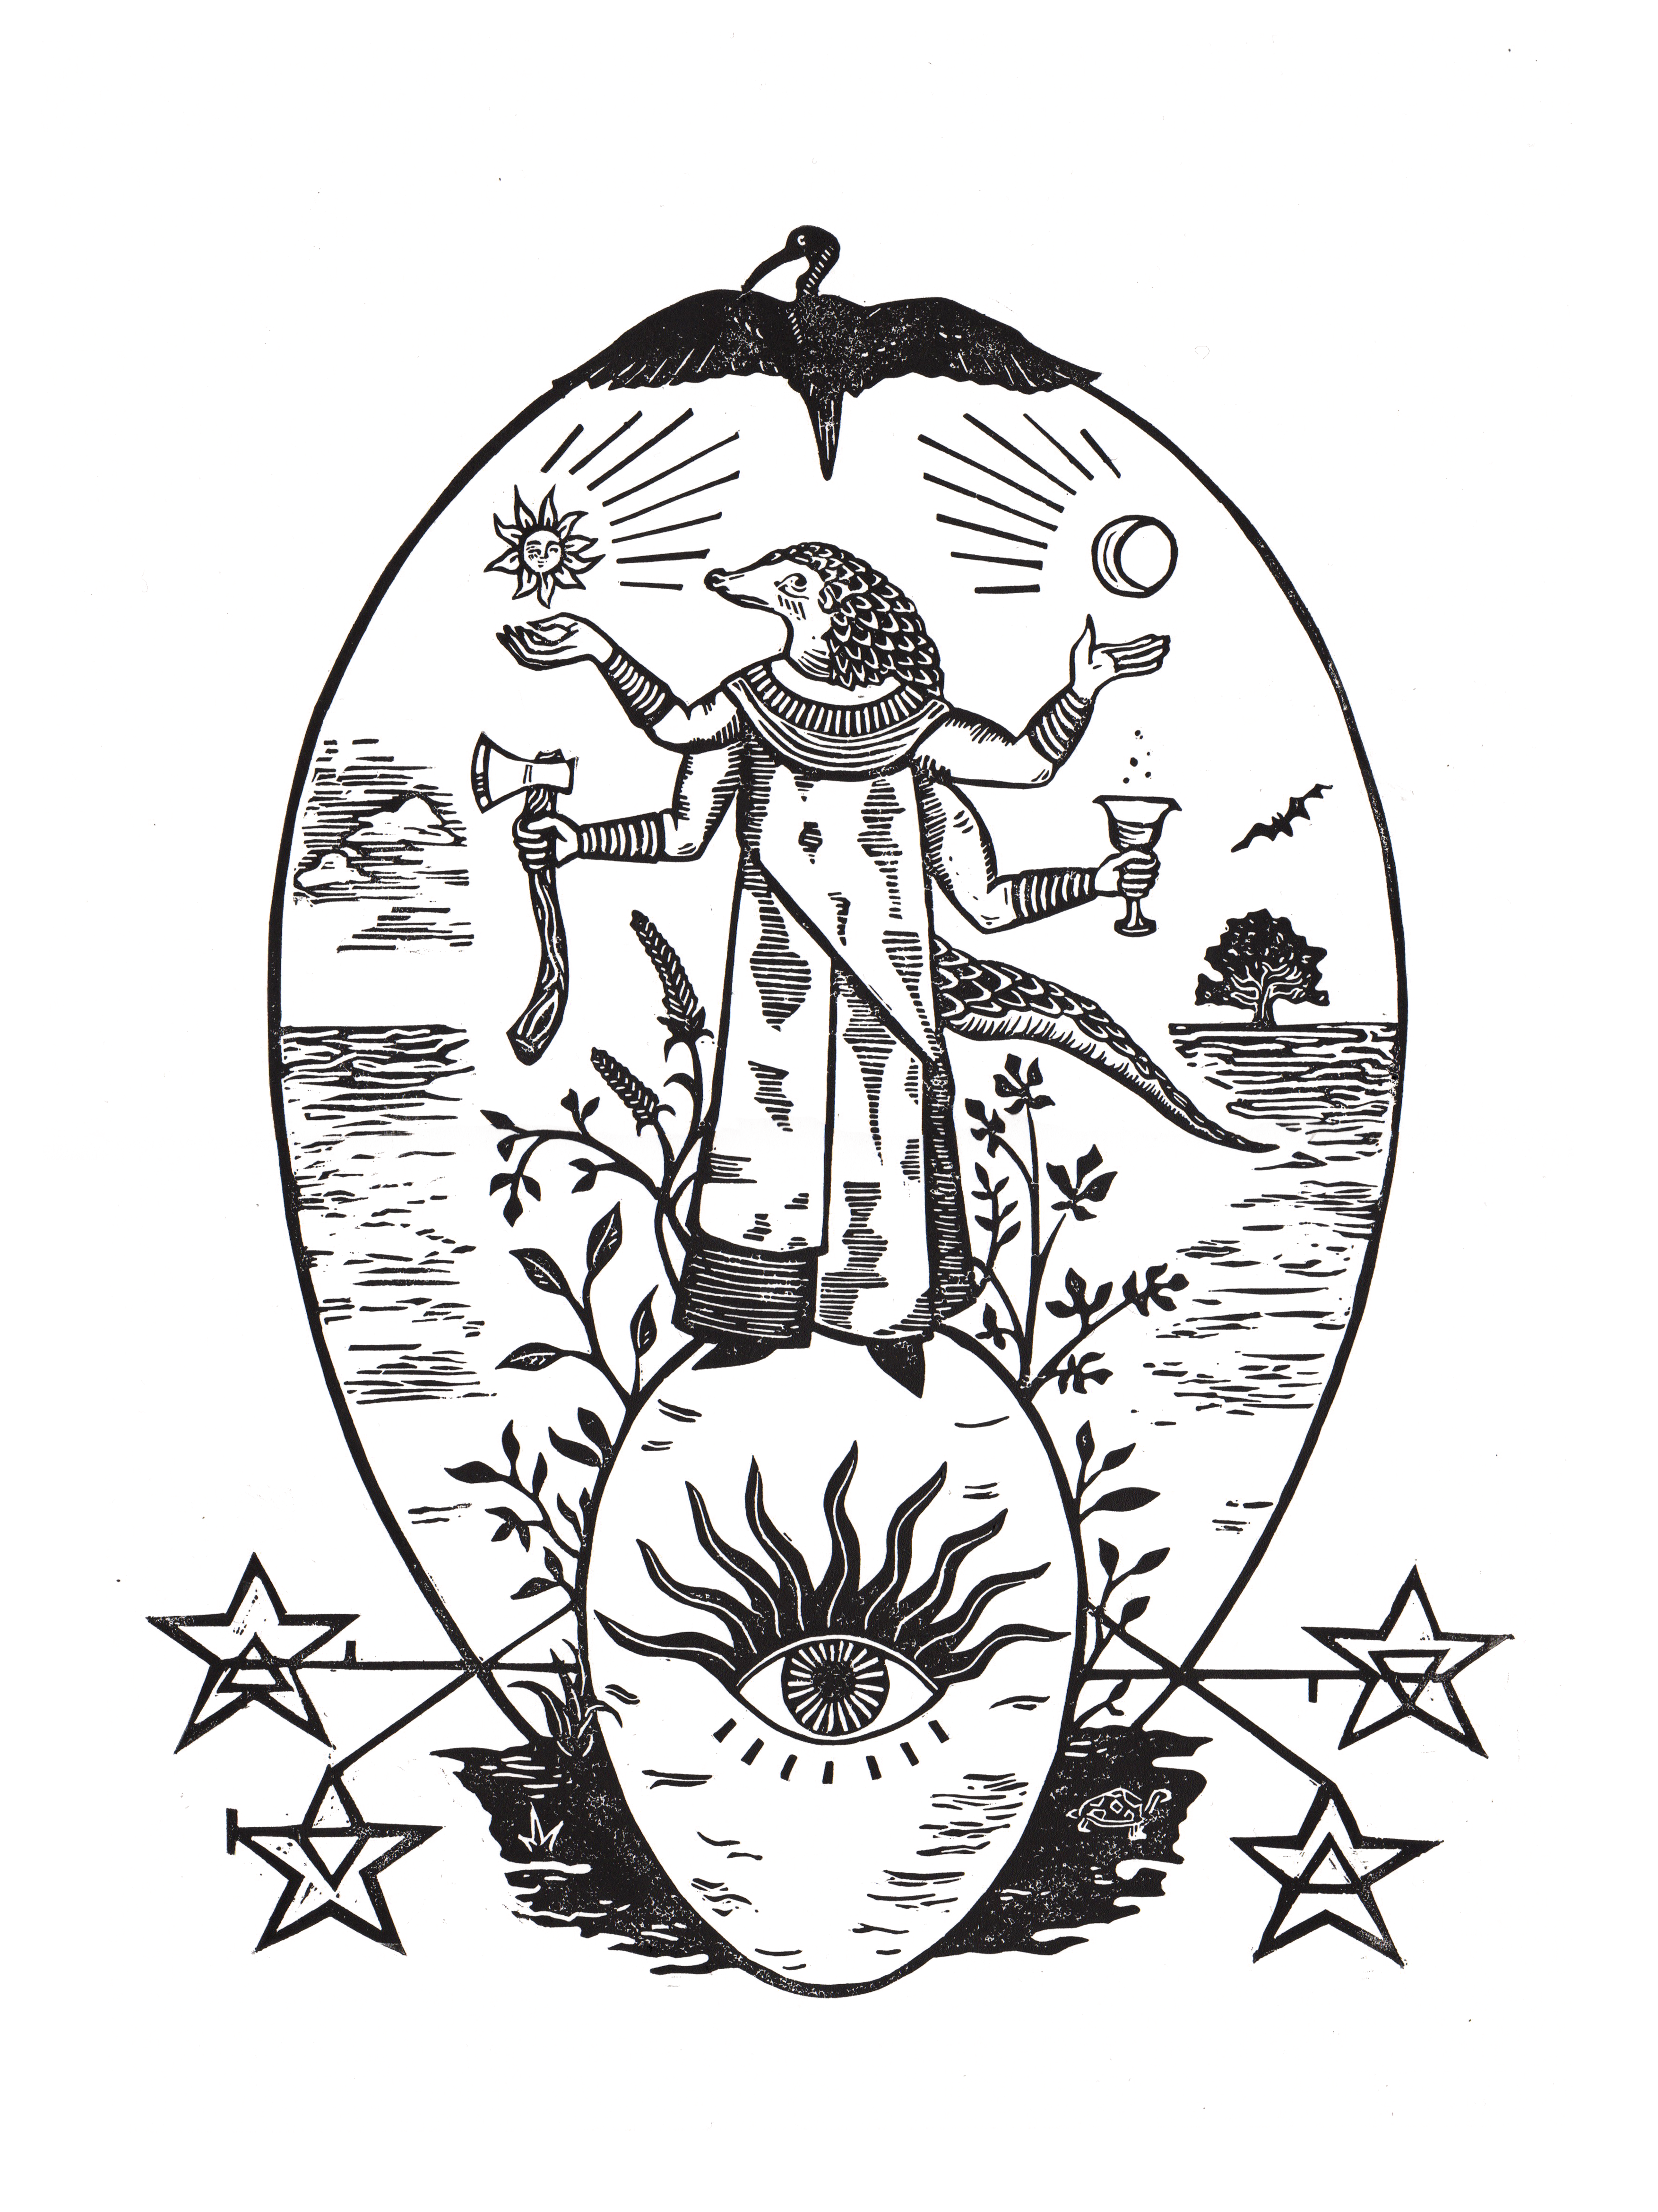 Lino print illustration showing a pangolin in ceremonial garb standing atop a giant egg with an all-seeing eye